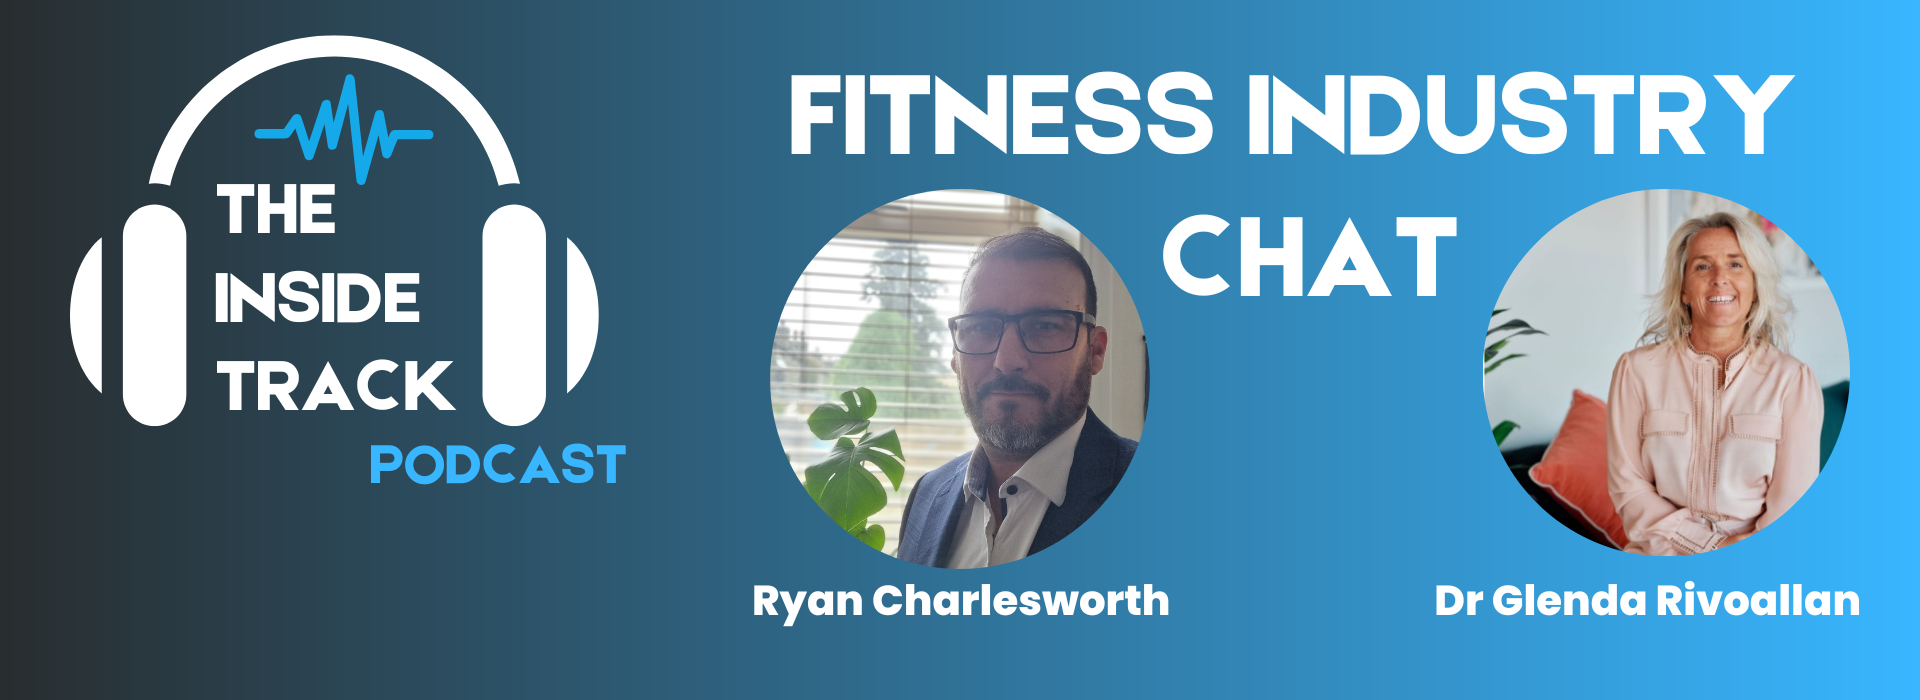 The Inside Track - Fitness Industry Chat